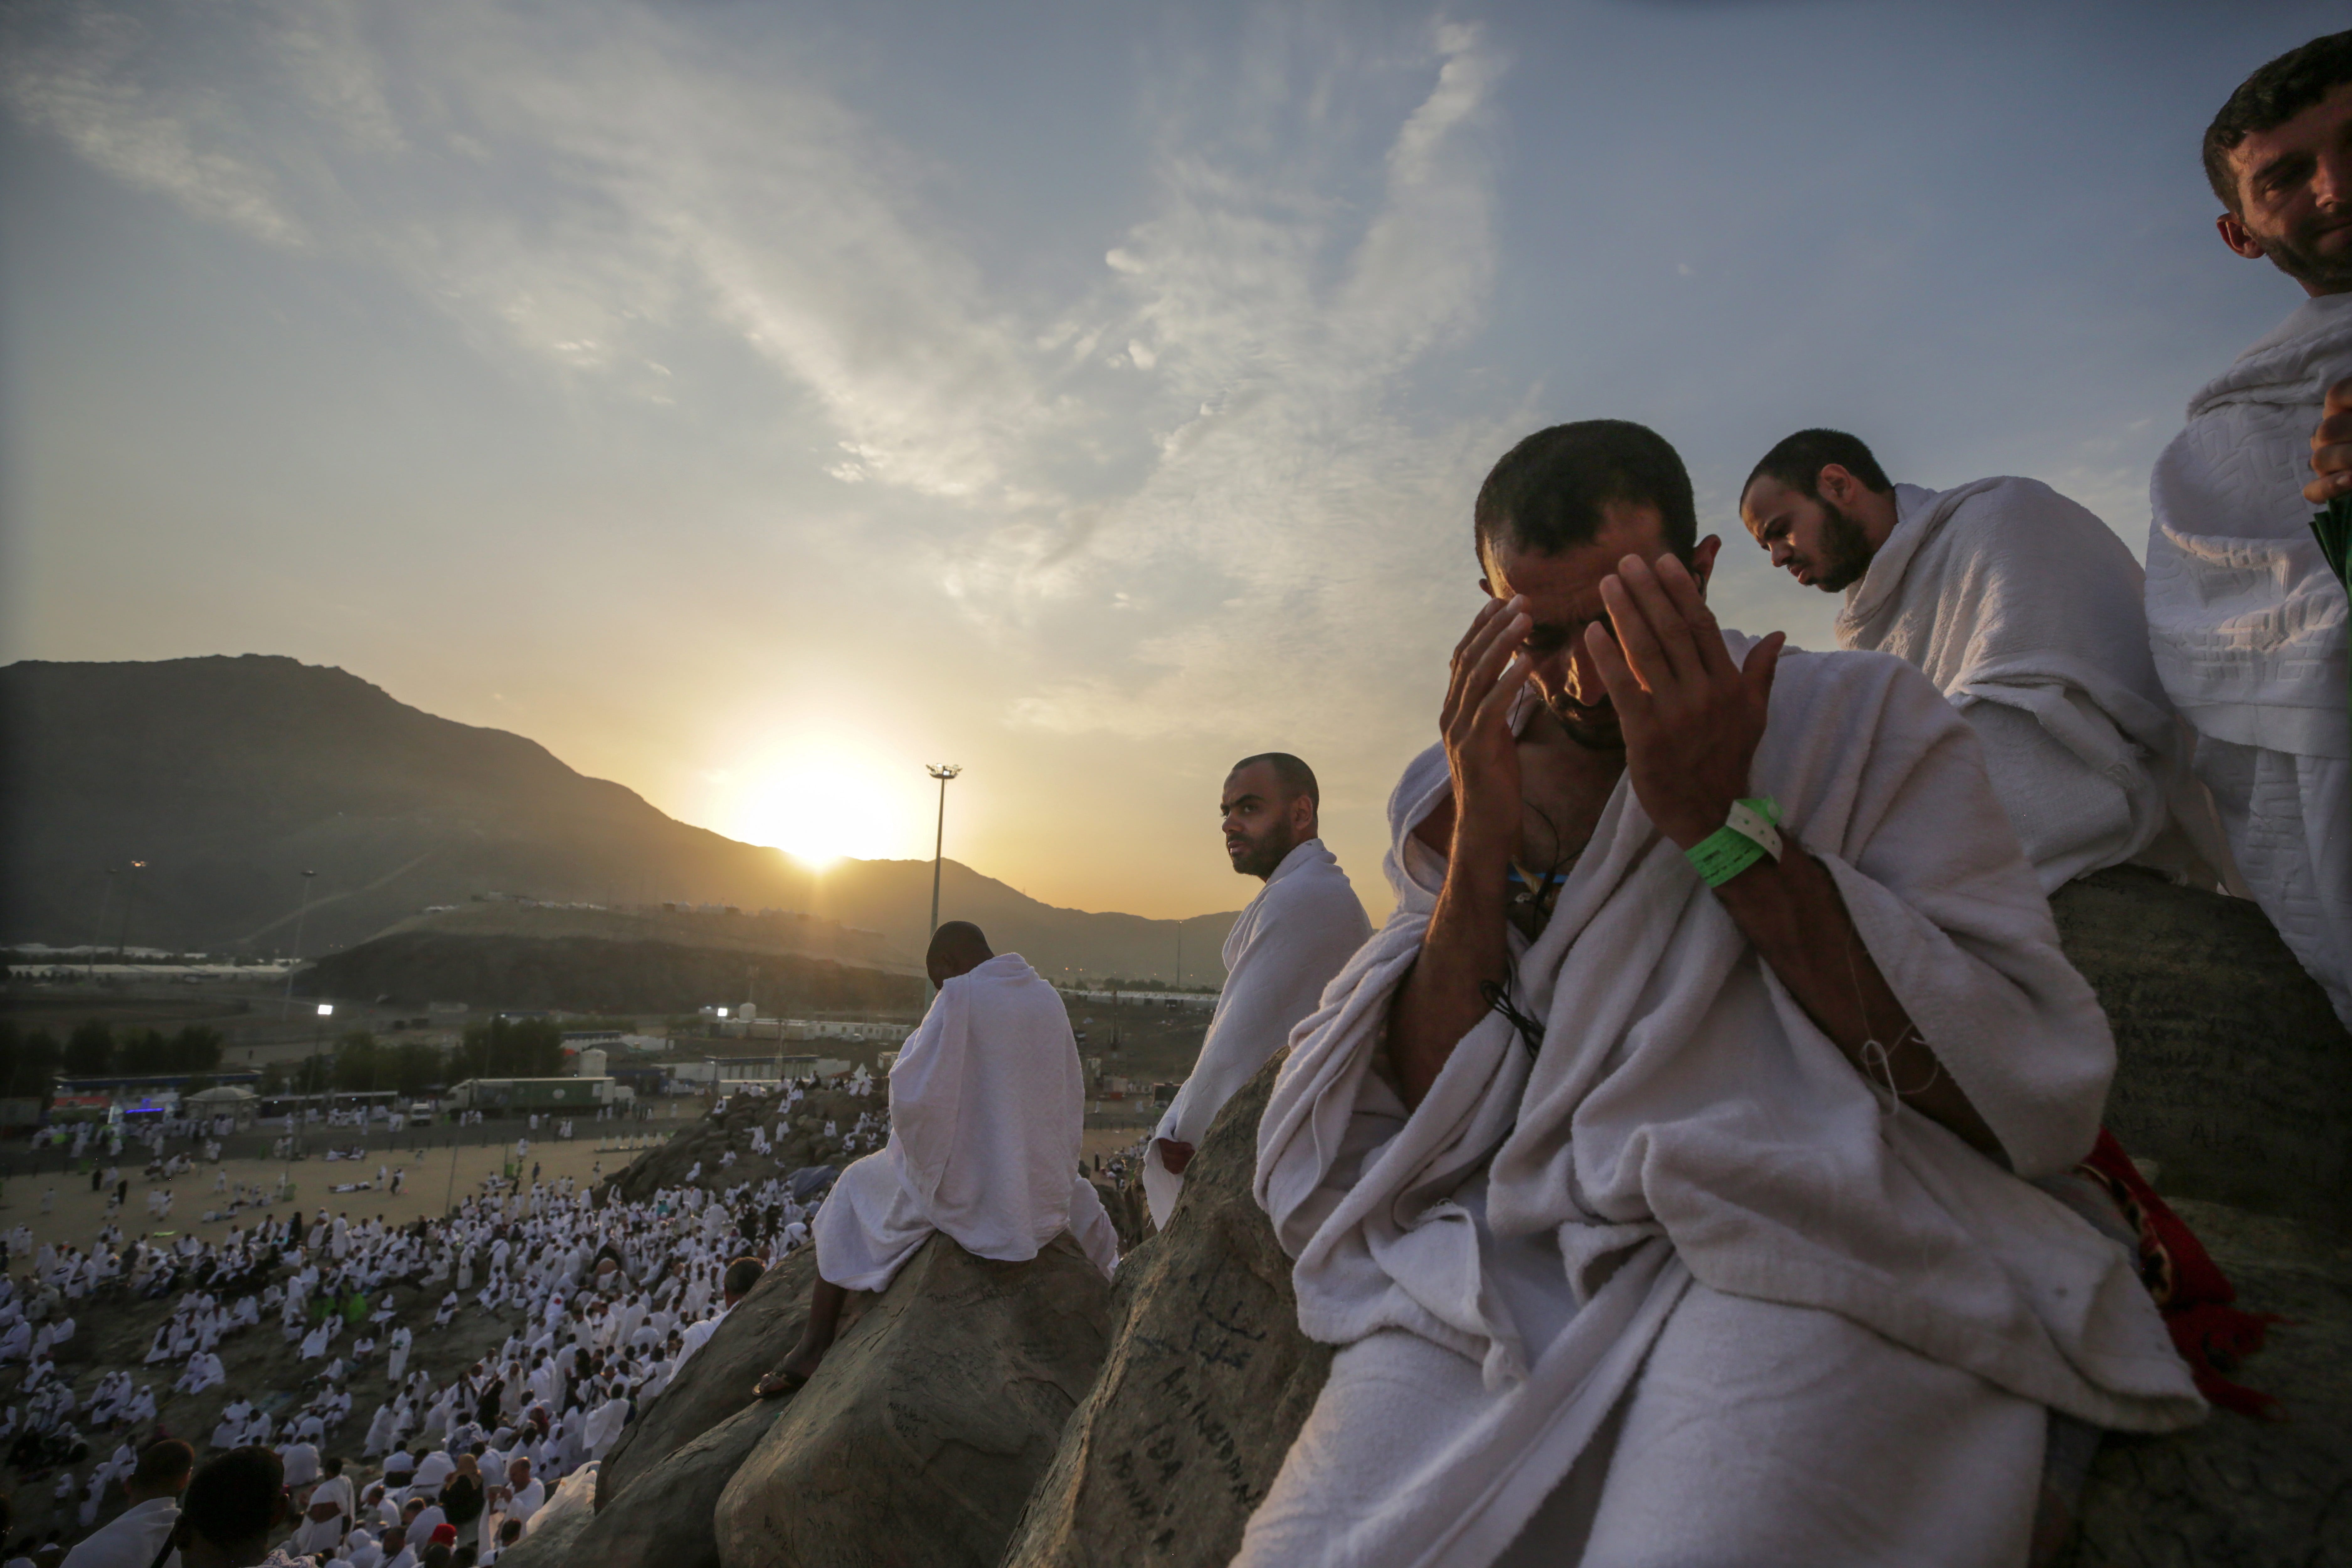 Hajj pilgrims pray during the Hajj pilgrimage in the Mount Arafat near Mecca, Saudi Arabia on Aug. 20, 2018. Around 2.5 million Muslims are expected to attend this year's Hajj pilgrimage, which is highlighted by the Day of Arafah, one day prior to Ei